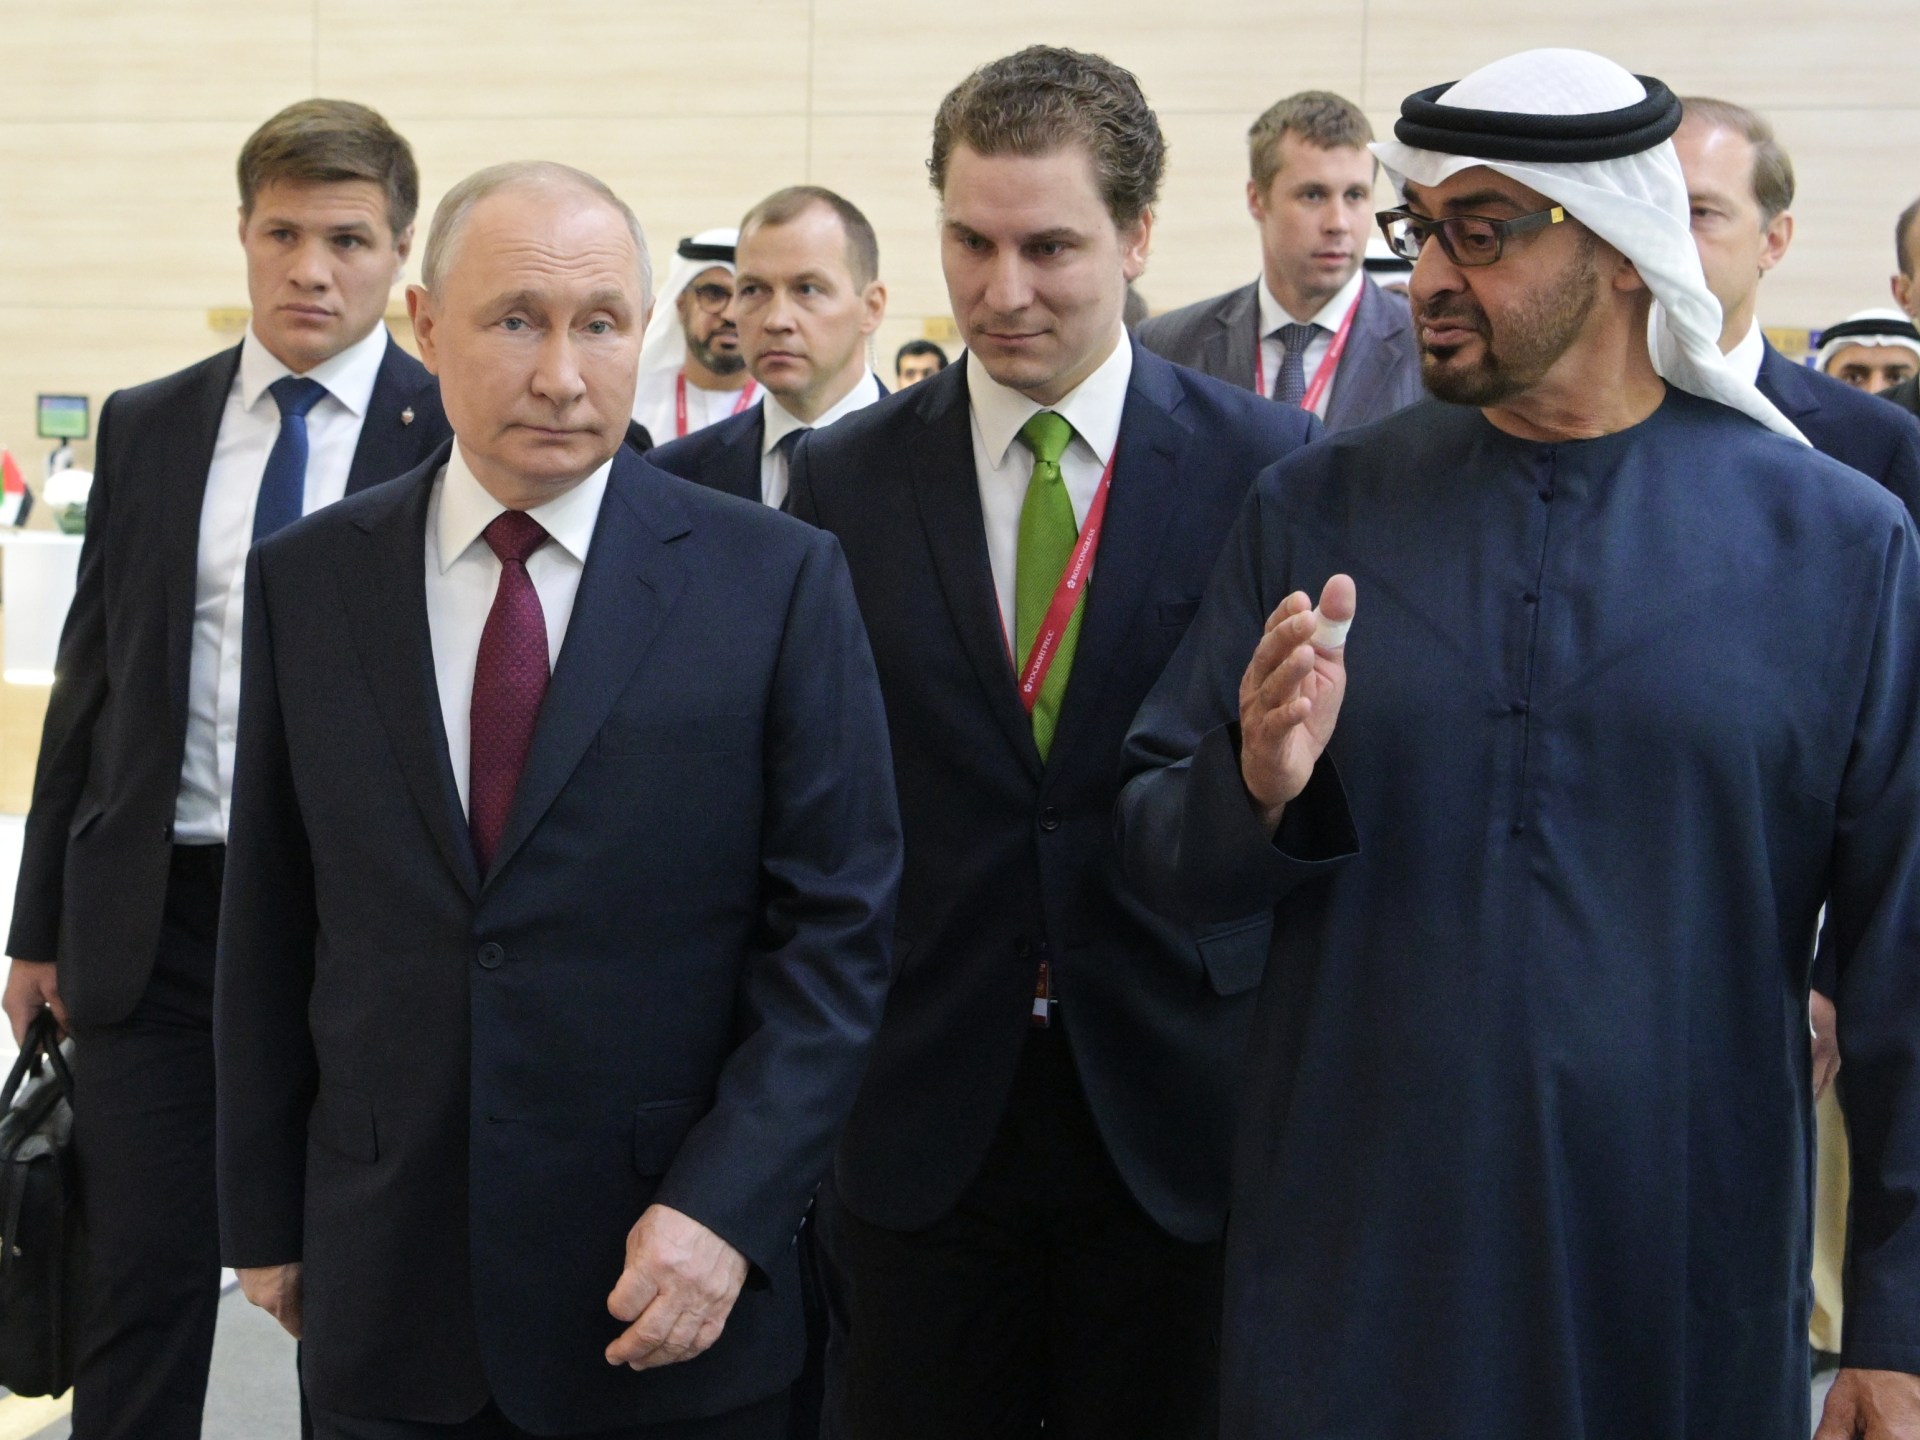 Will the UAE harm Russia with export controls to please the US amid Israel’s warfare?  |  Warfare between Russia and Ukraine